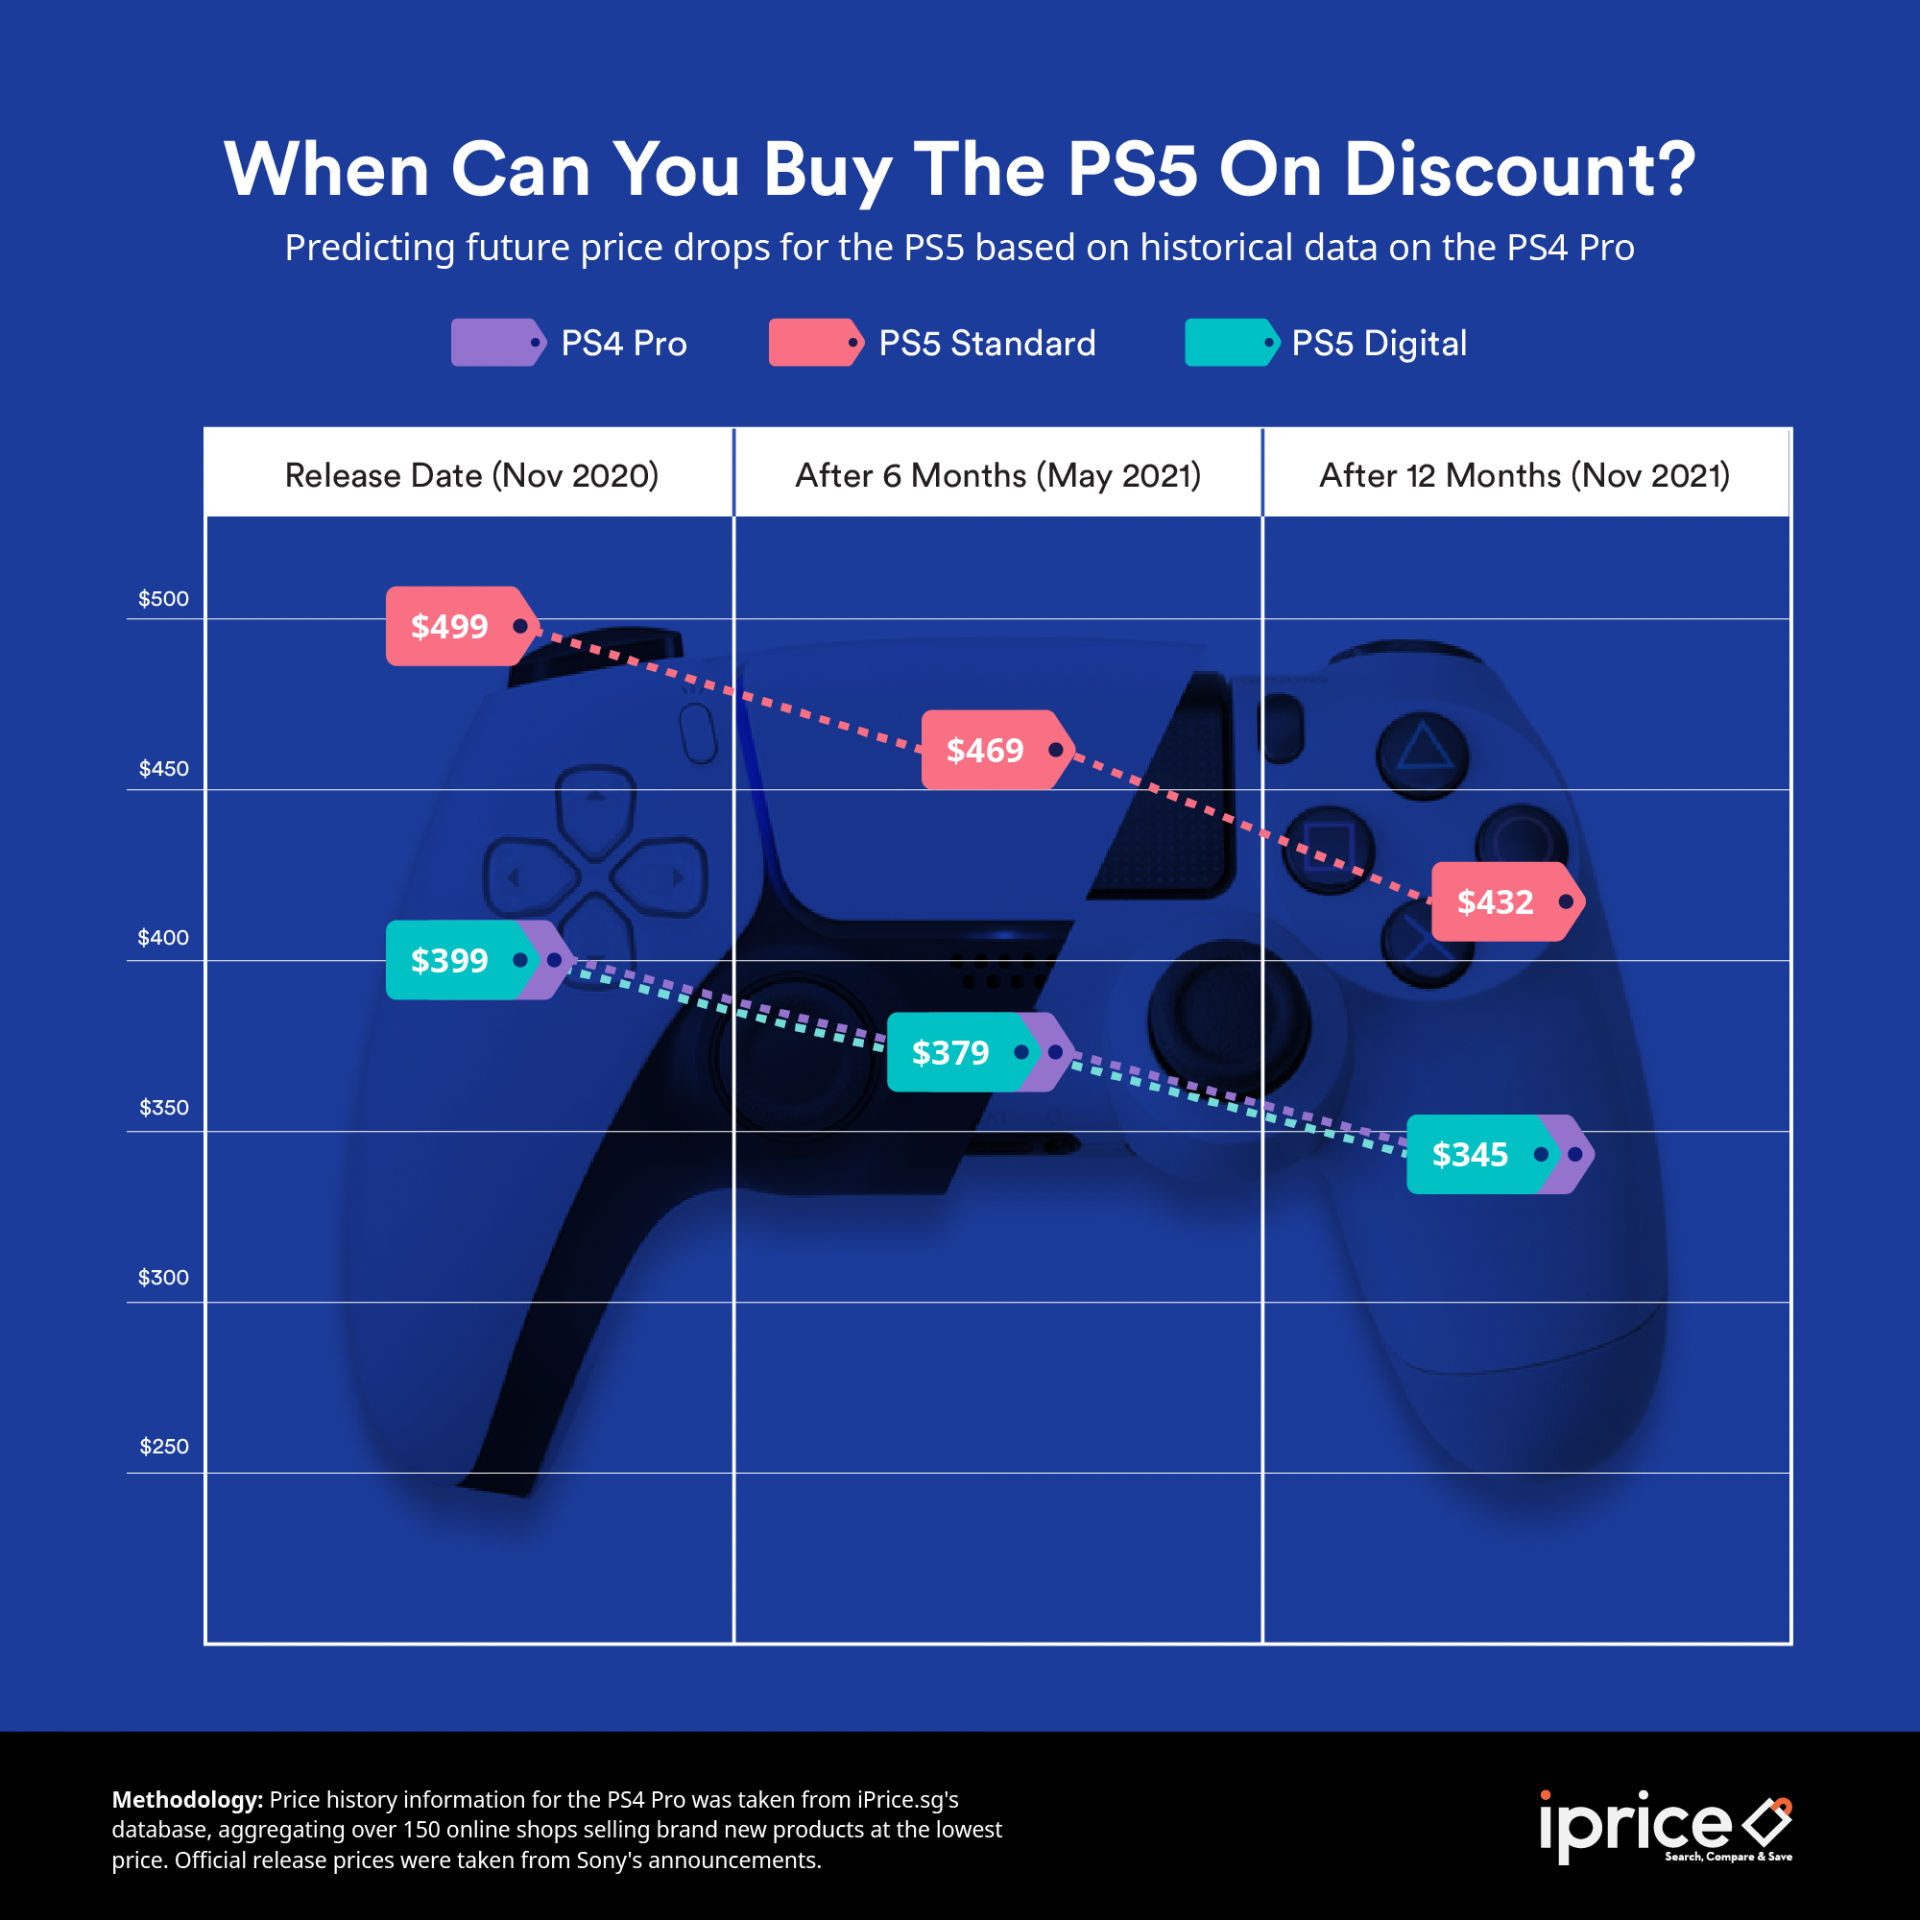 Sony PS5 Price Could Drop in 2021 Globally, Says Report; But Should You